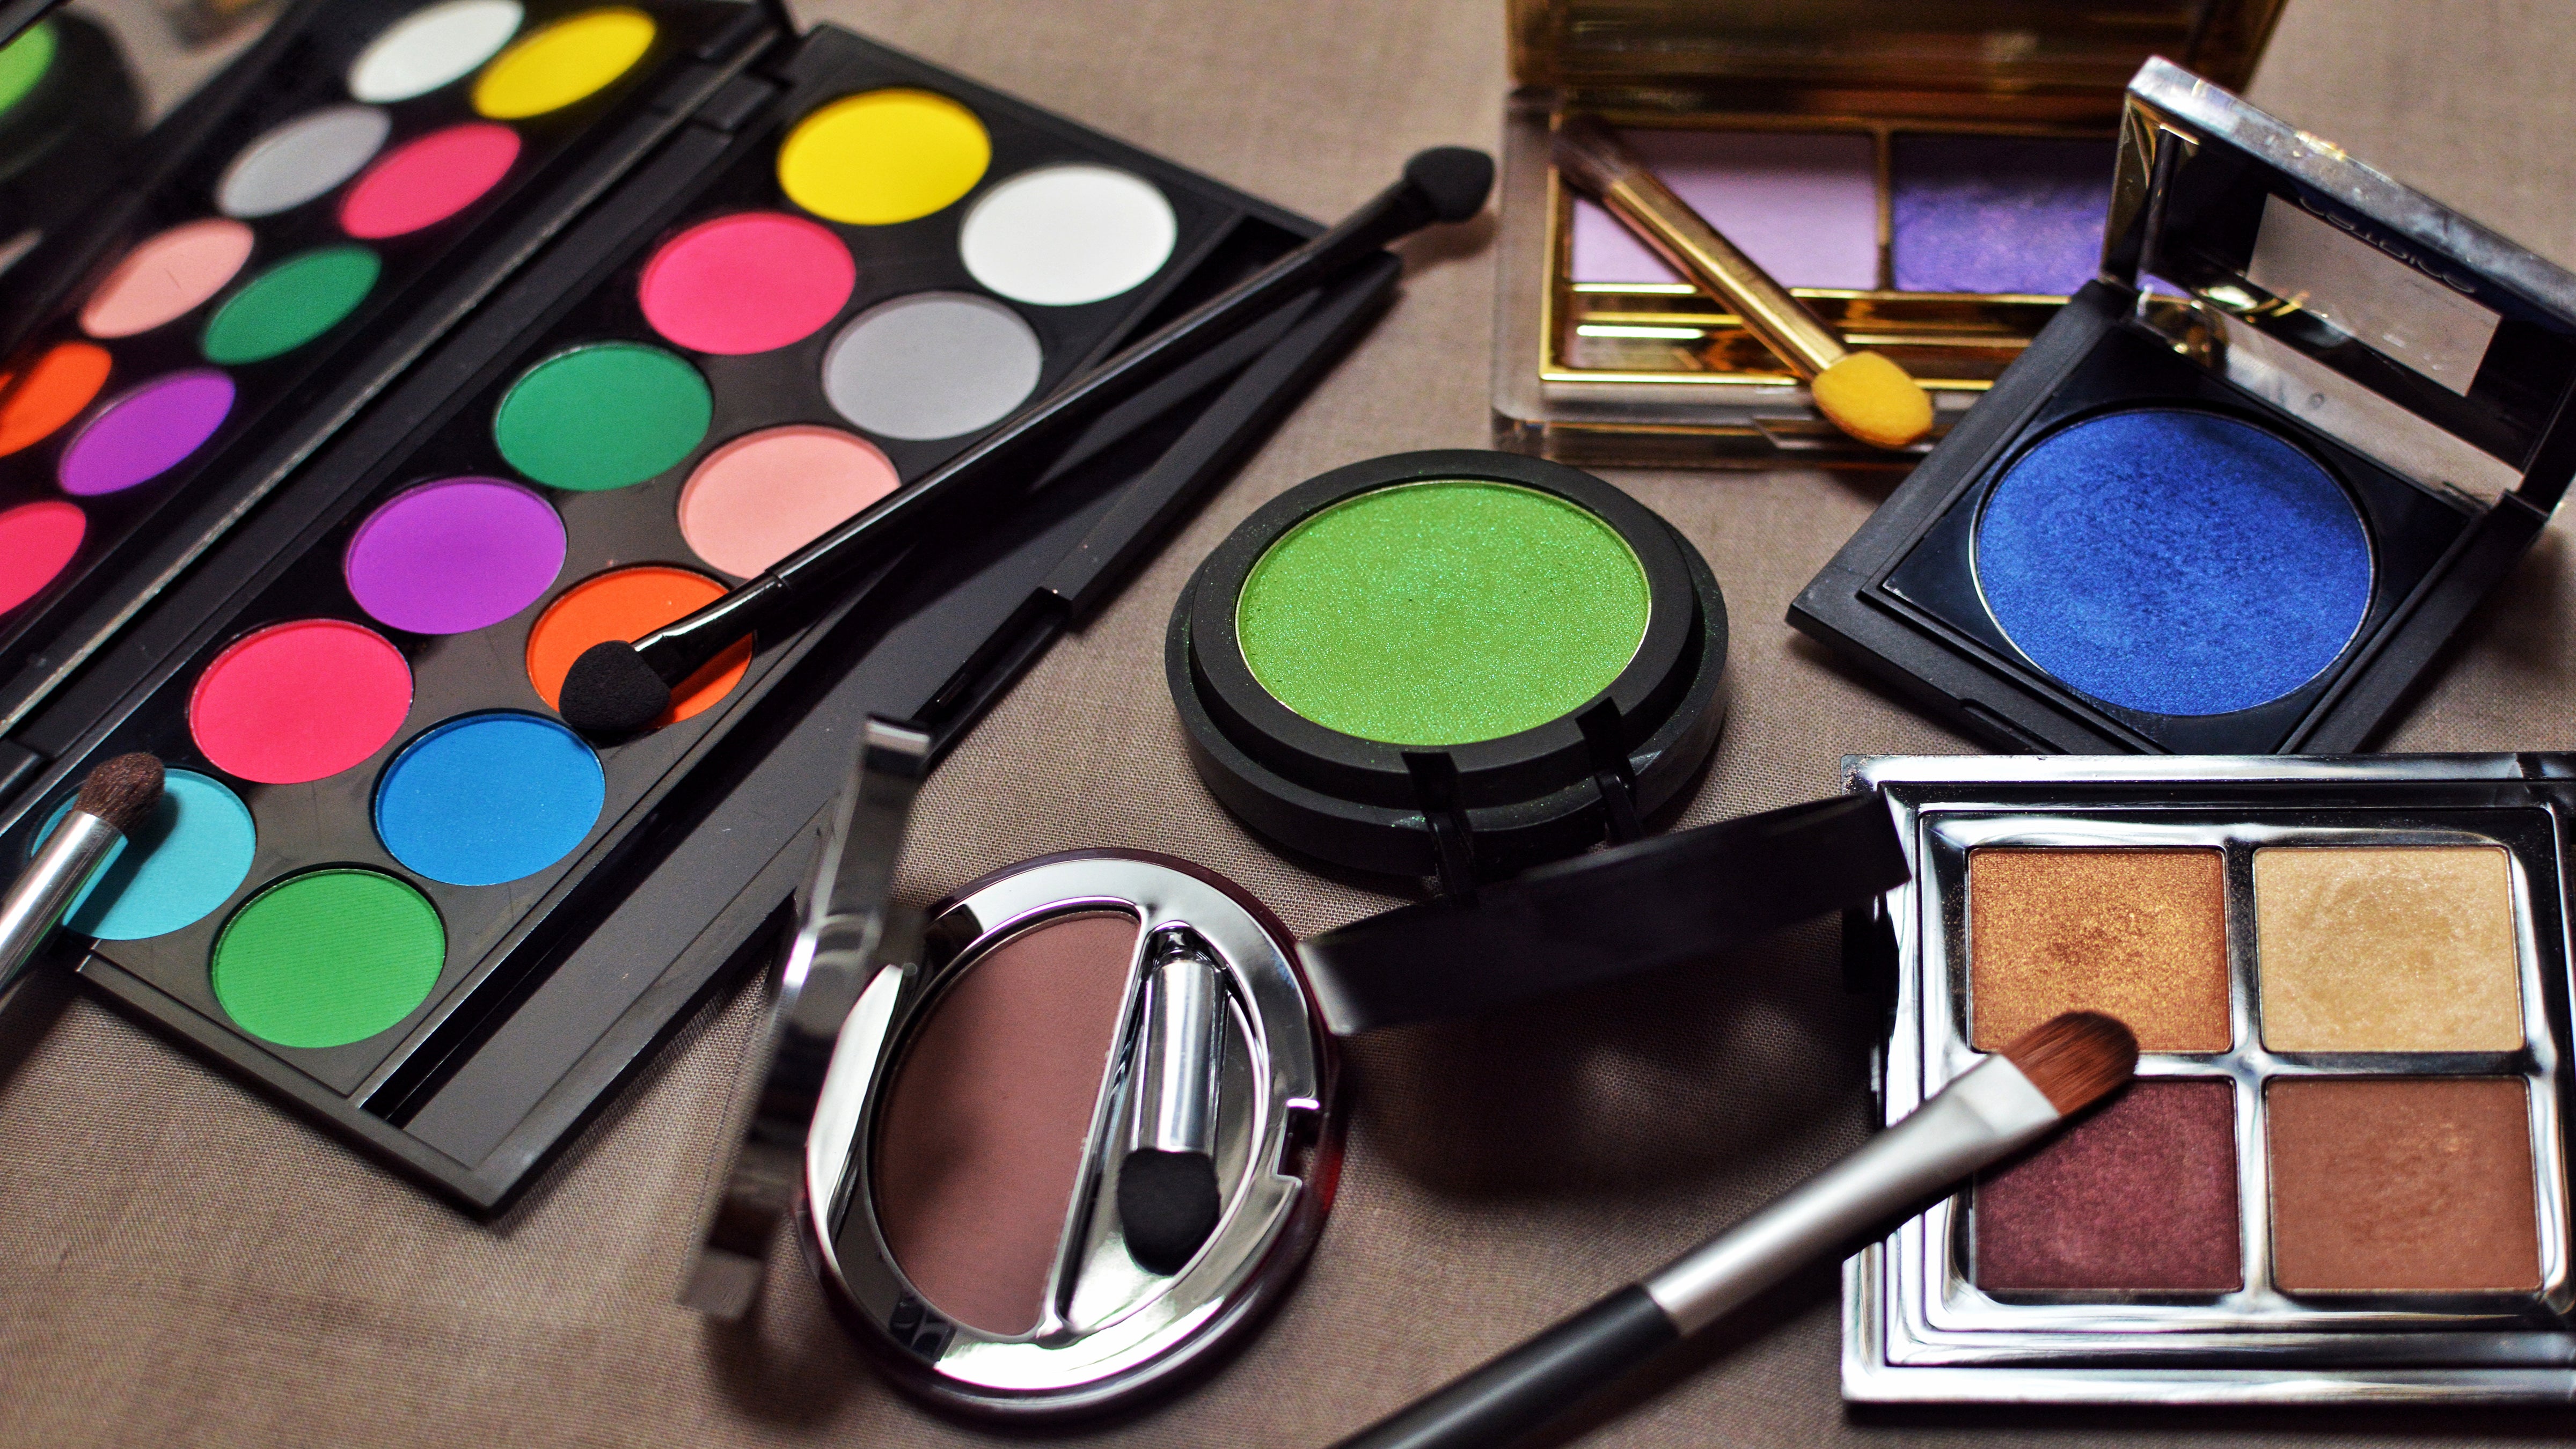 Would You Know If You Bought Counterfeit Cosmetics?